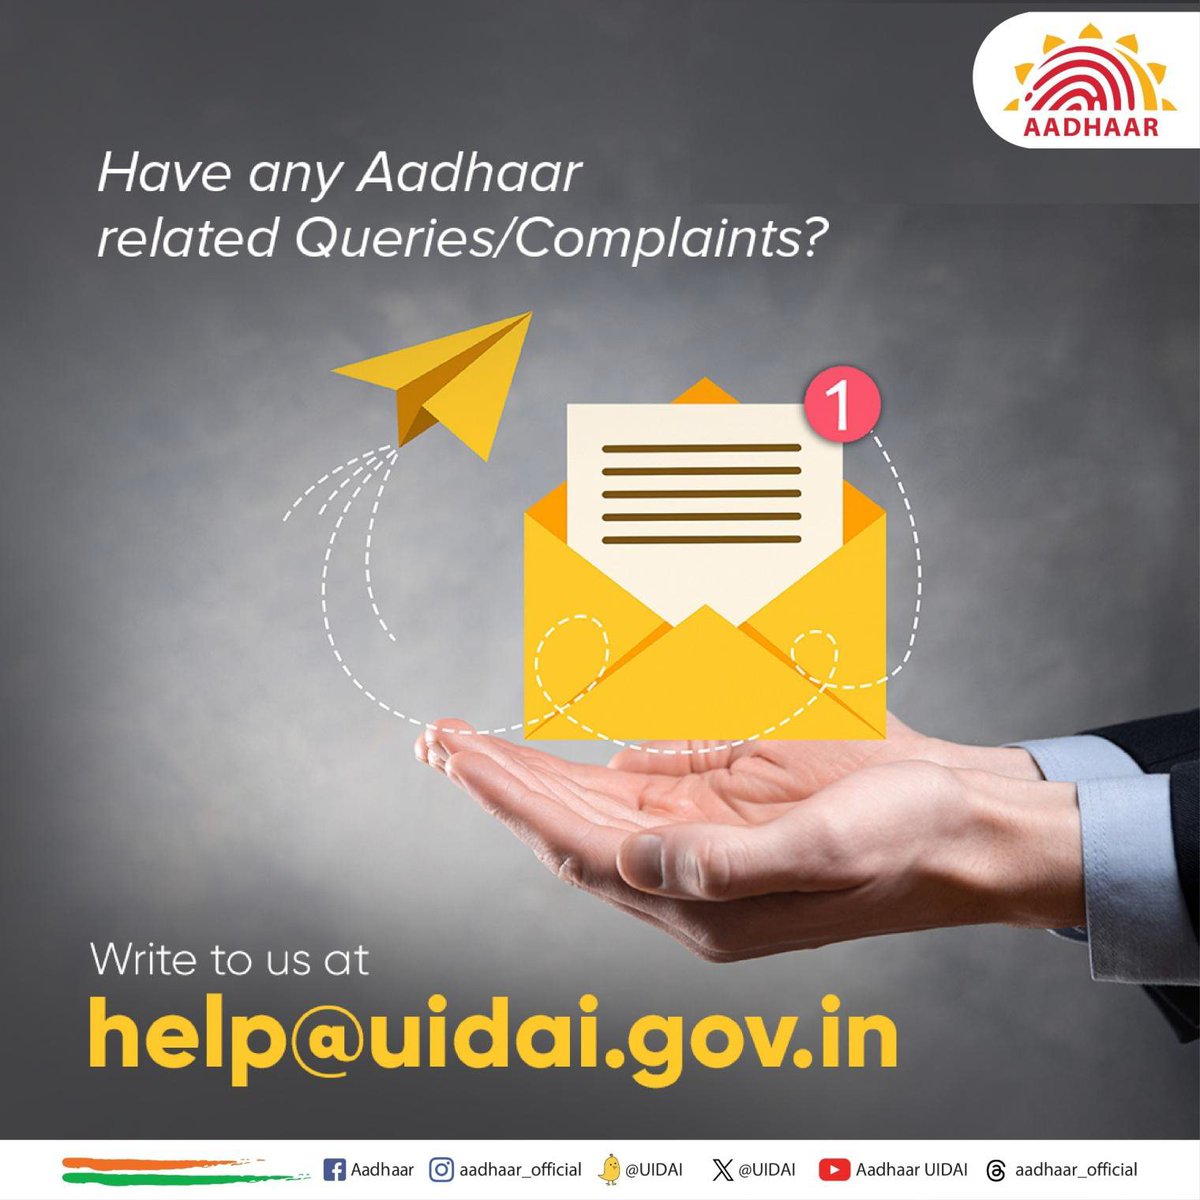 Our Priority: Ensuring solutions to Aadhaar holders’ queries. You may send us an email at help@uidai.gov.in for any Aadhaar-related queries/complaints.